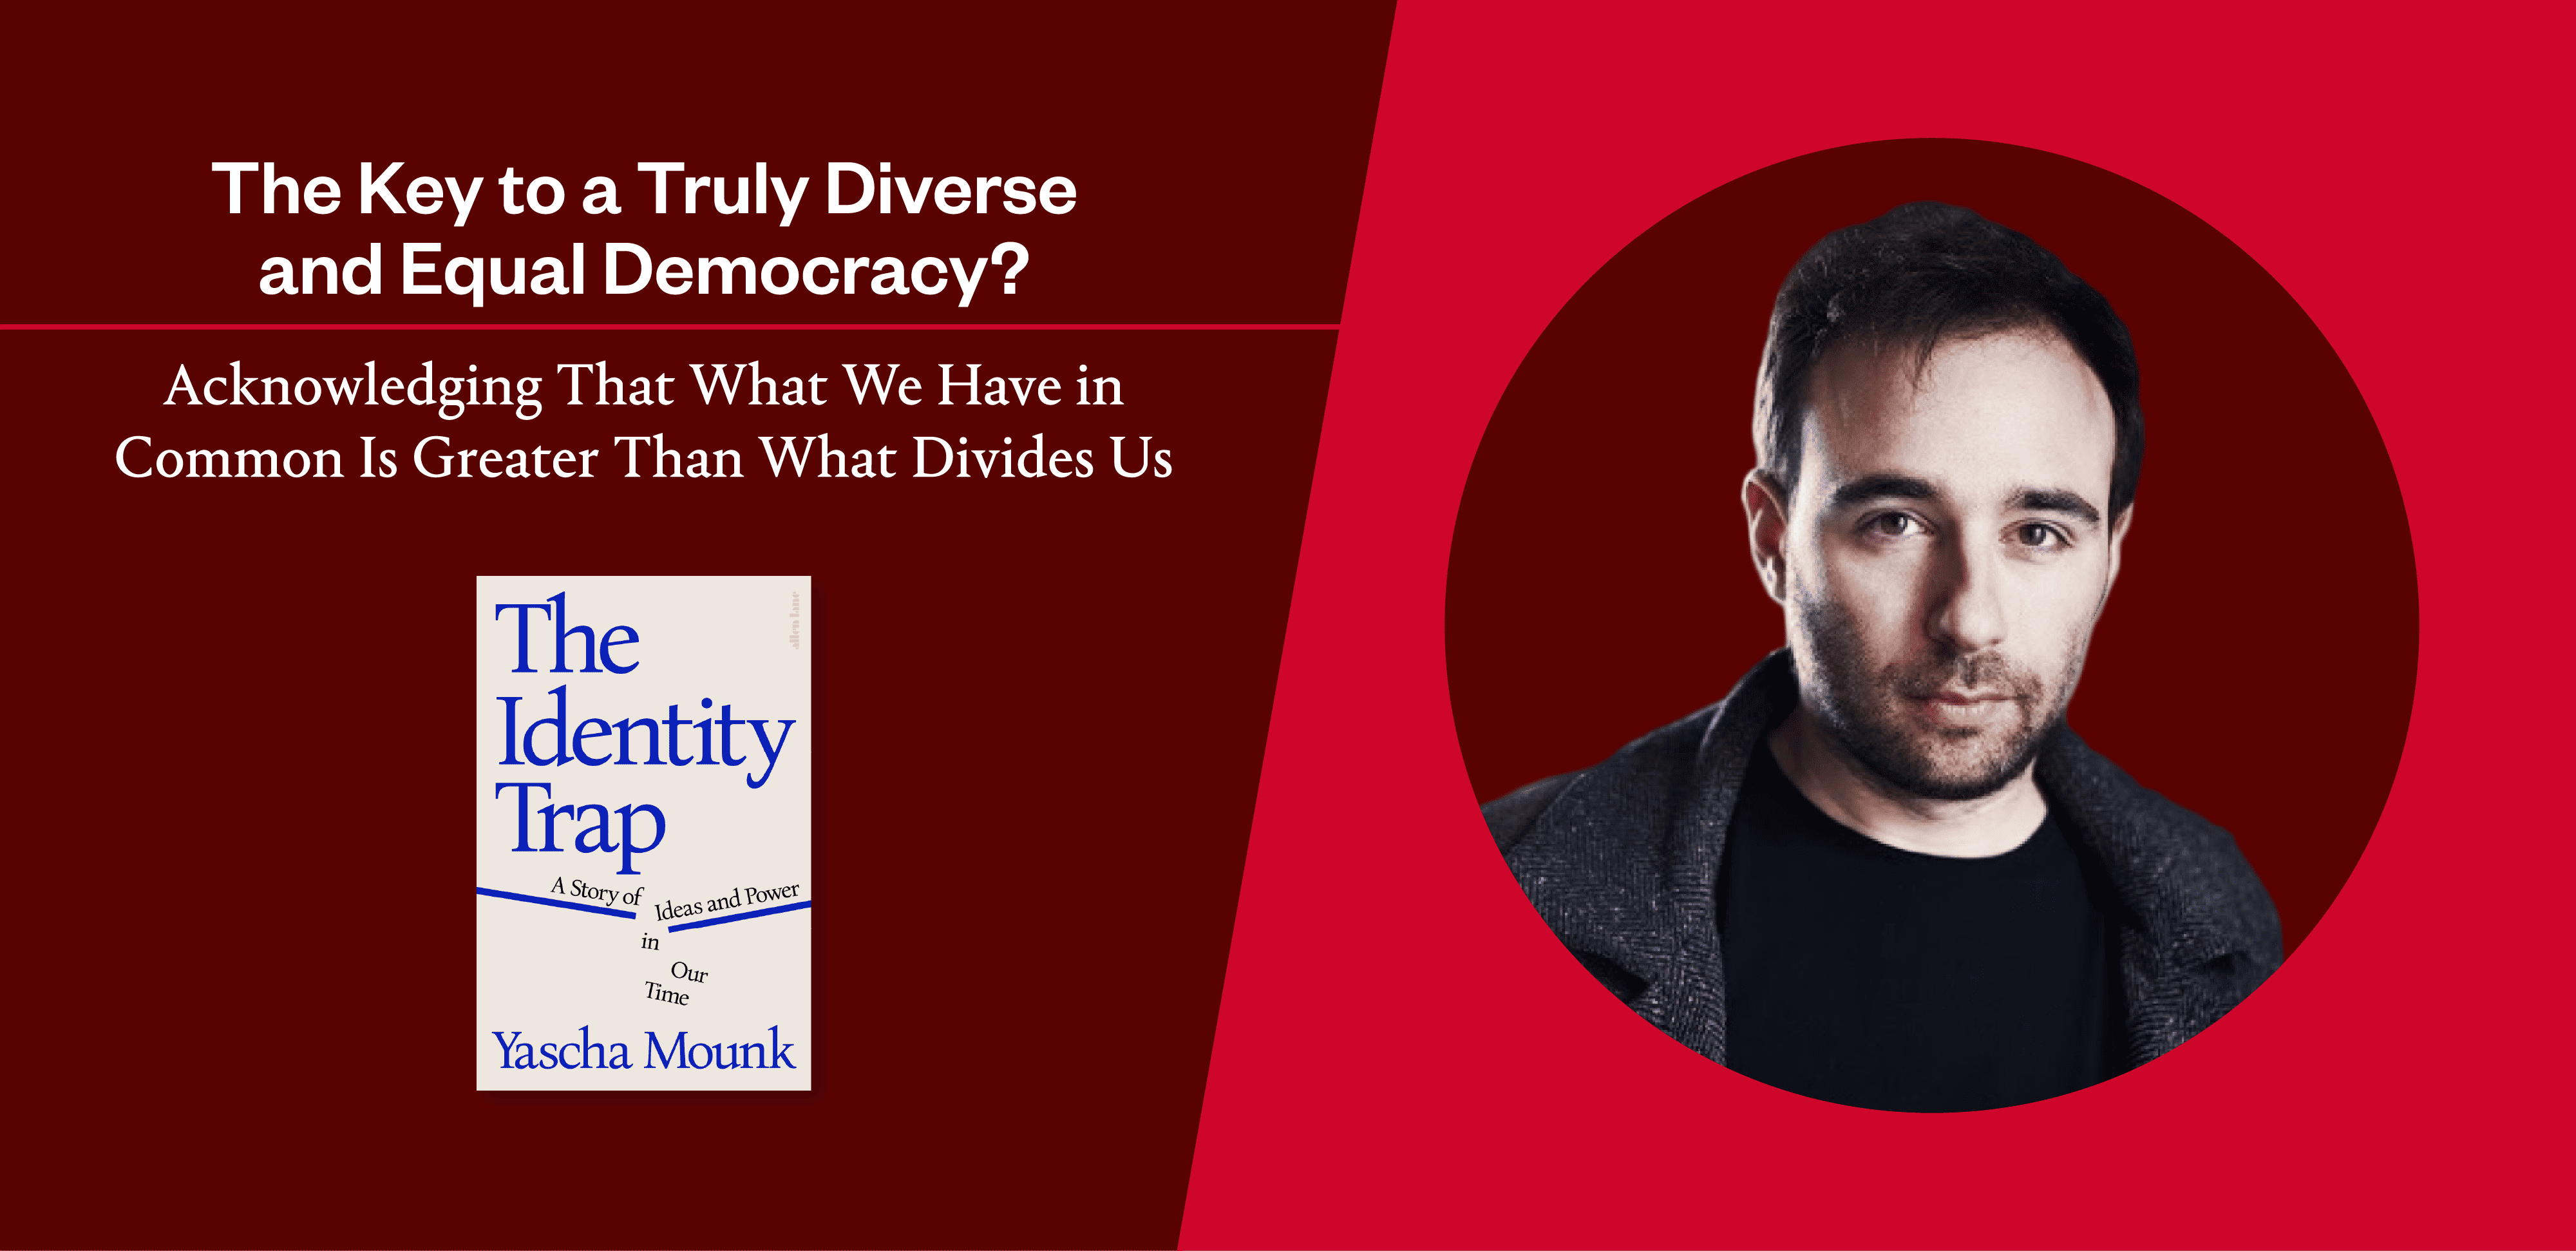 Is a Narrow Focus on Group Identity Making It Harder for Us to Get Along? Yascha Mounk on Saving Our Democracy